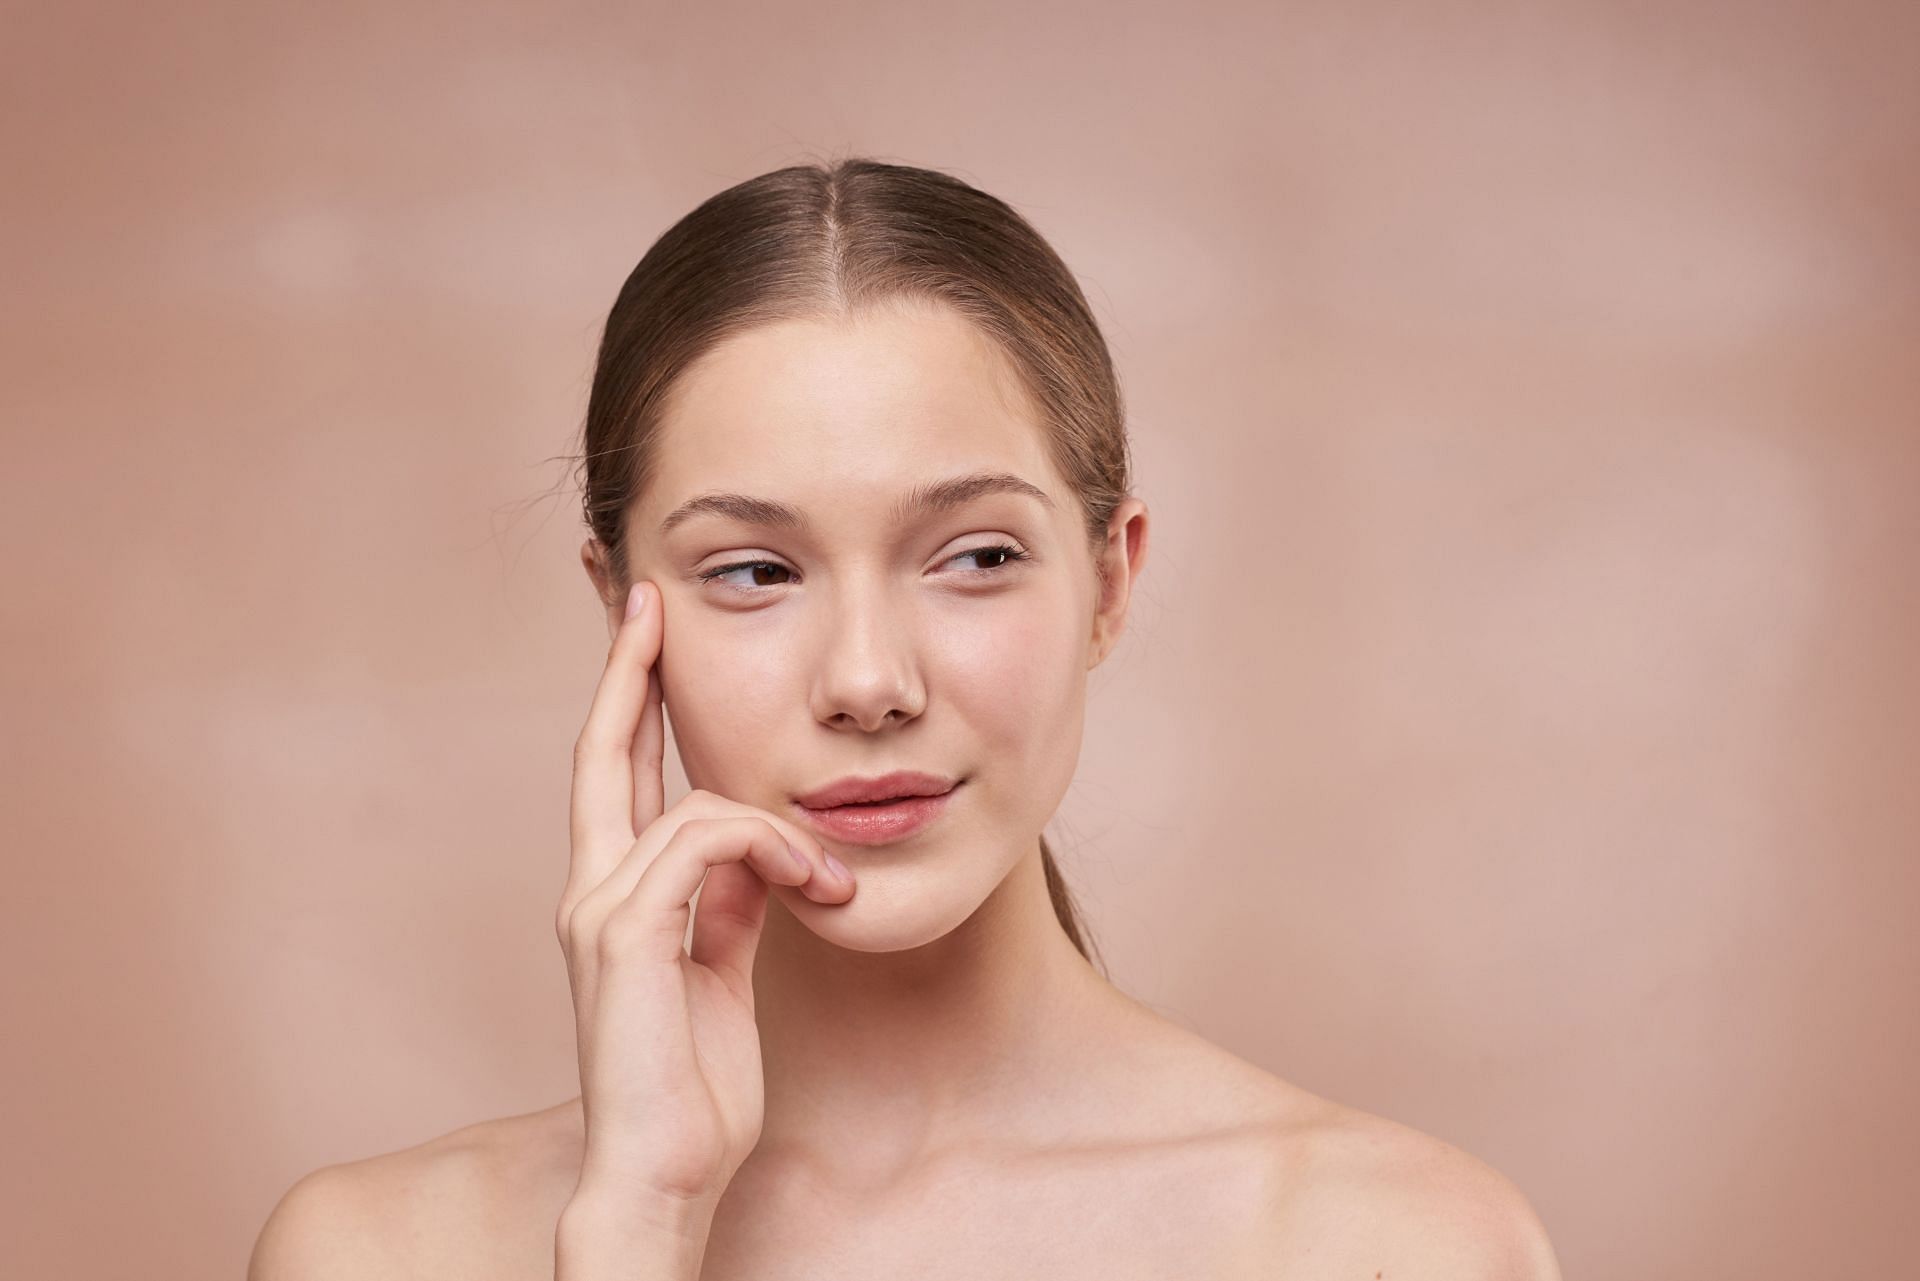 Home facial products can also help in unclogging all the dirt from your skin. (Image via Pexels / Shiny Diamond)